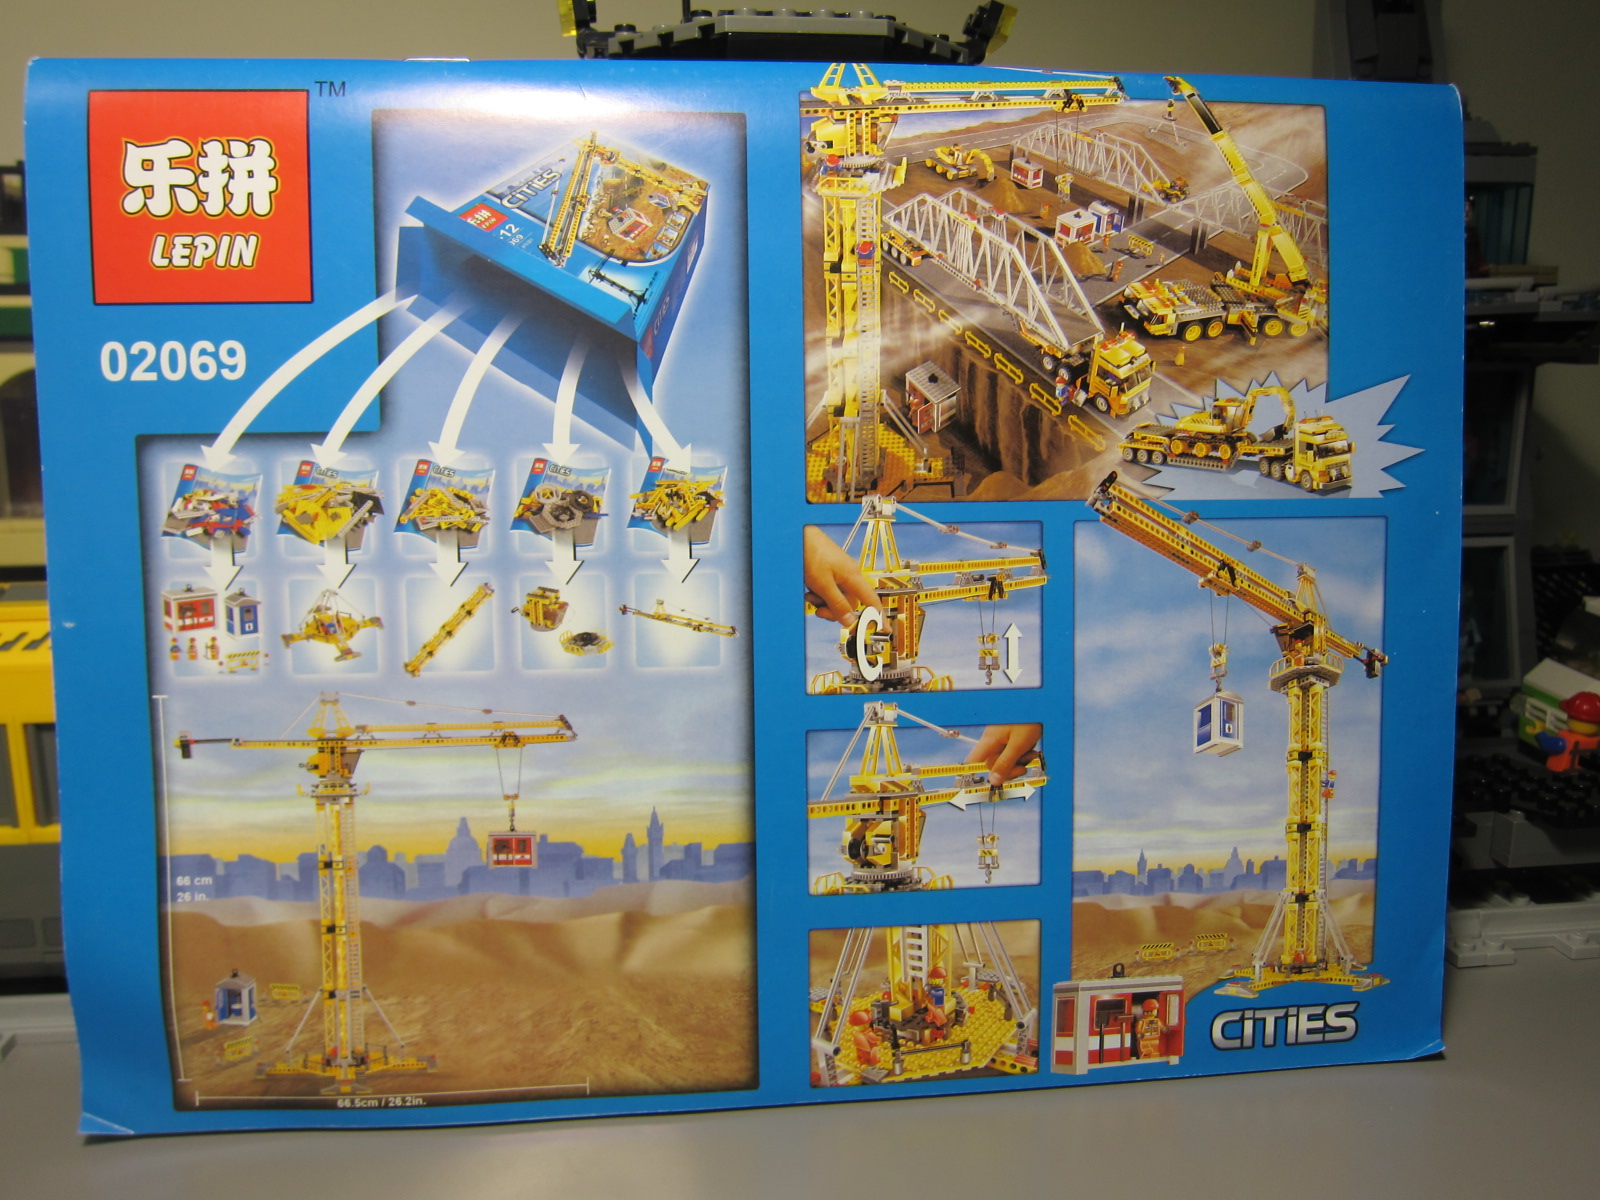 It's Not Lego: Lepin 02069 Not Lego Tower Crane Set Review Part